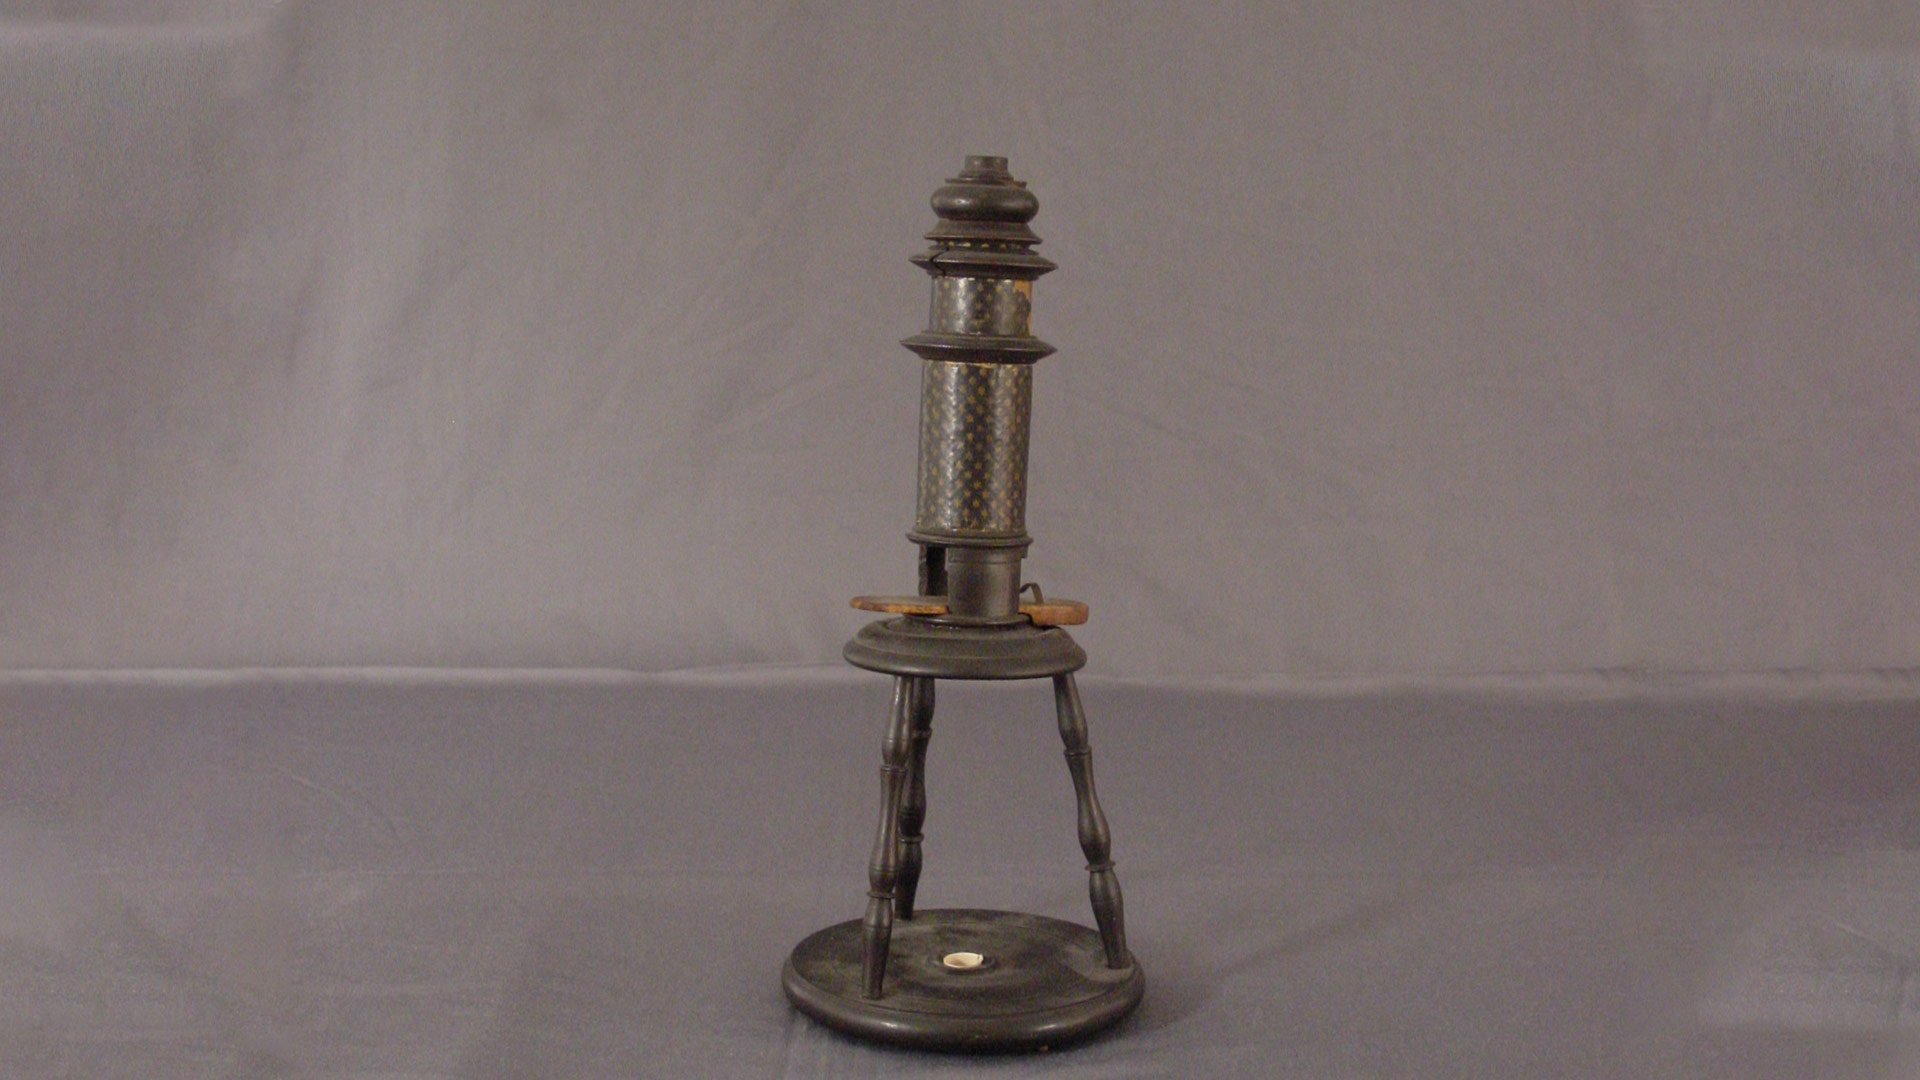 upright 17th century microscope using two lenses 